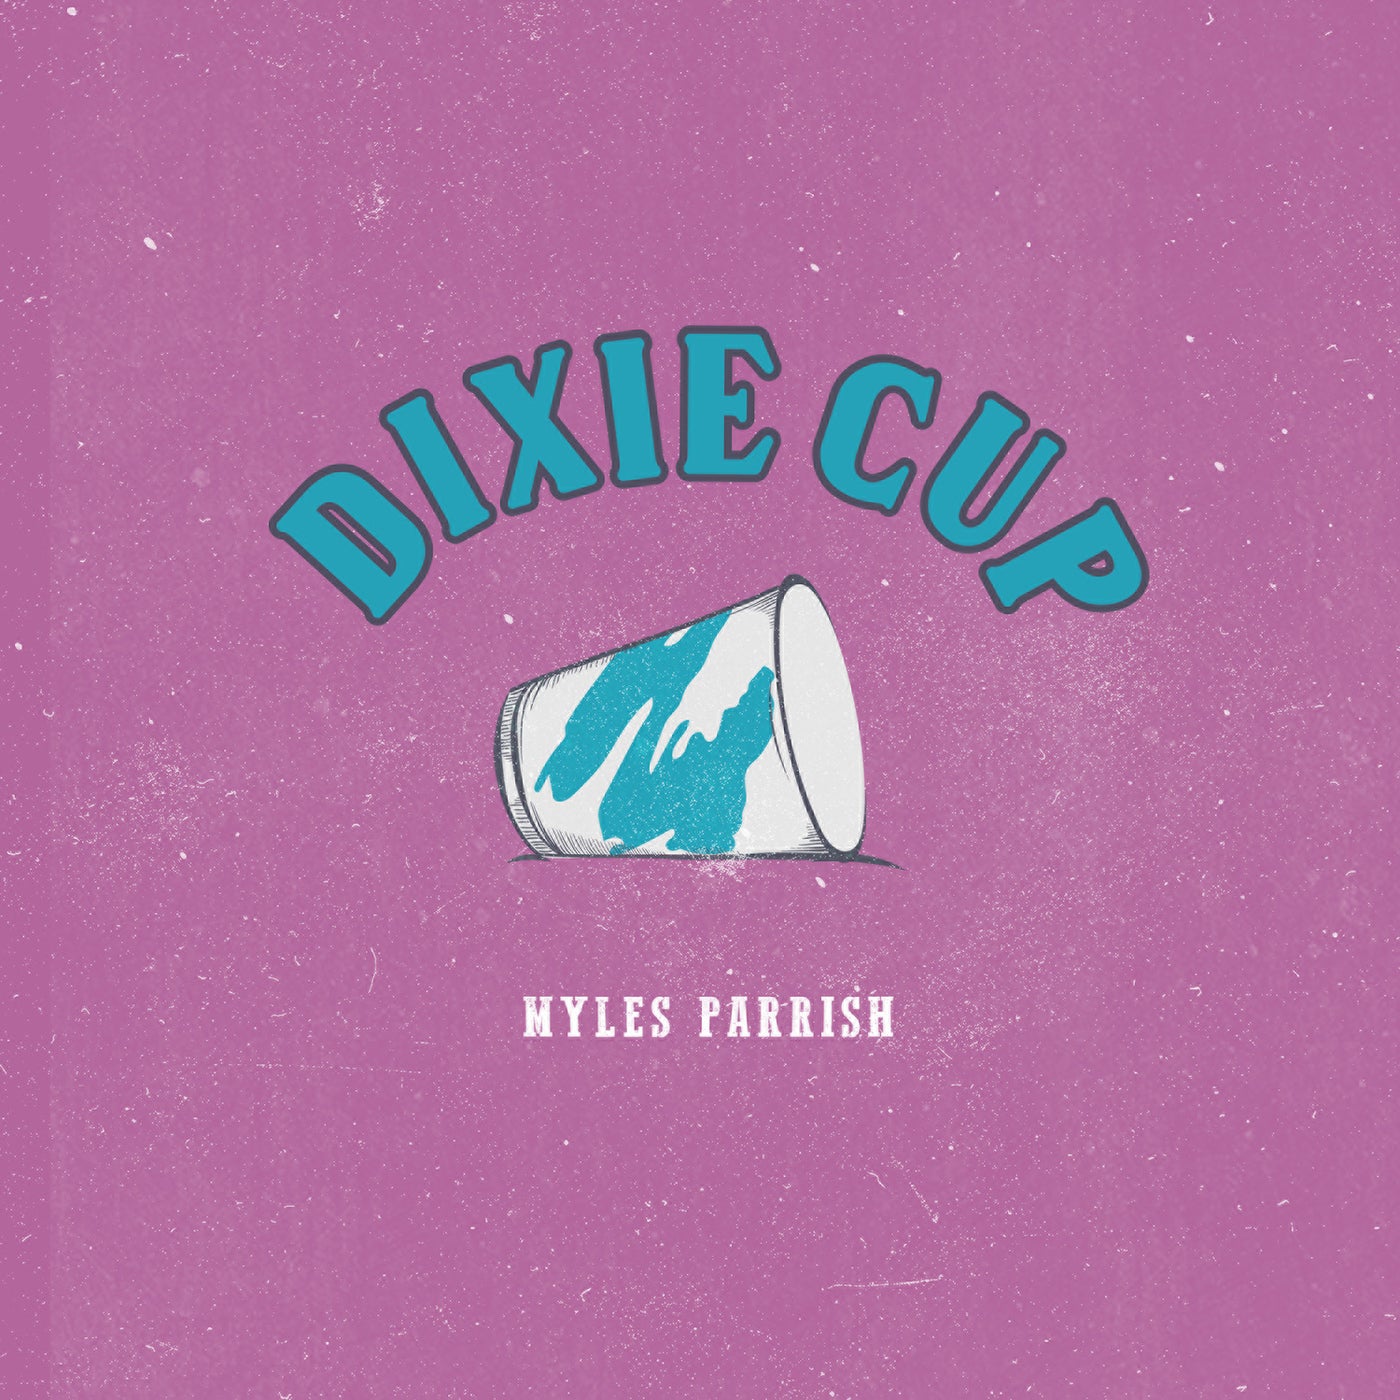 Dixie Cup by Myles Parrish on Beatsource